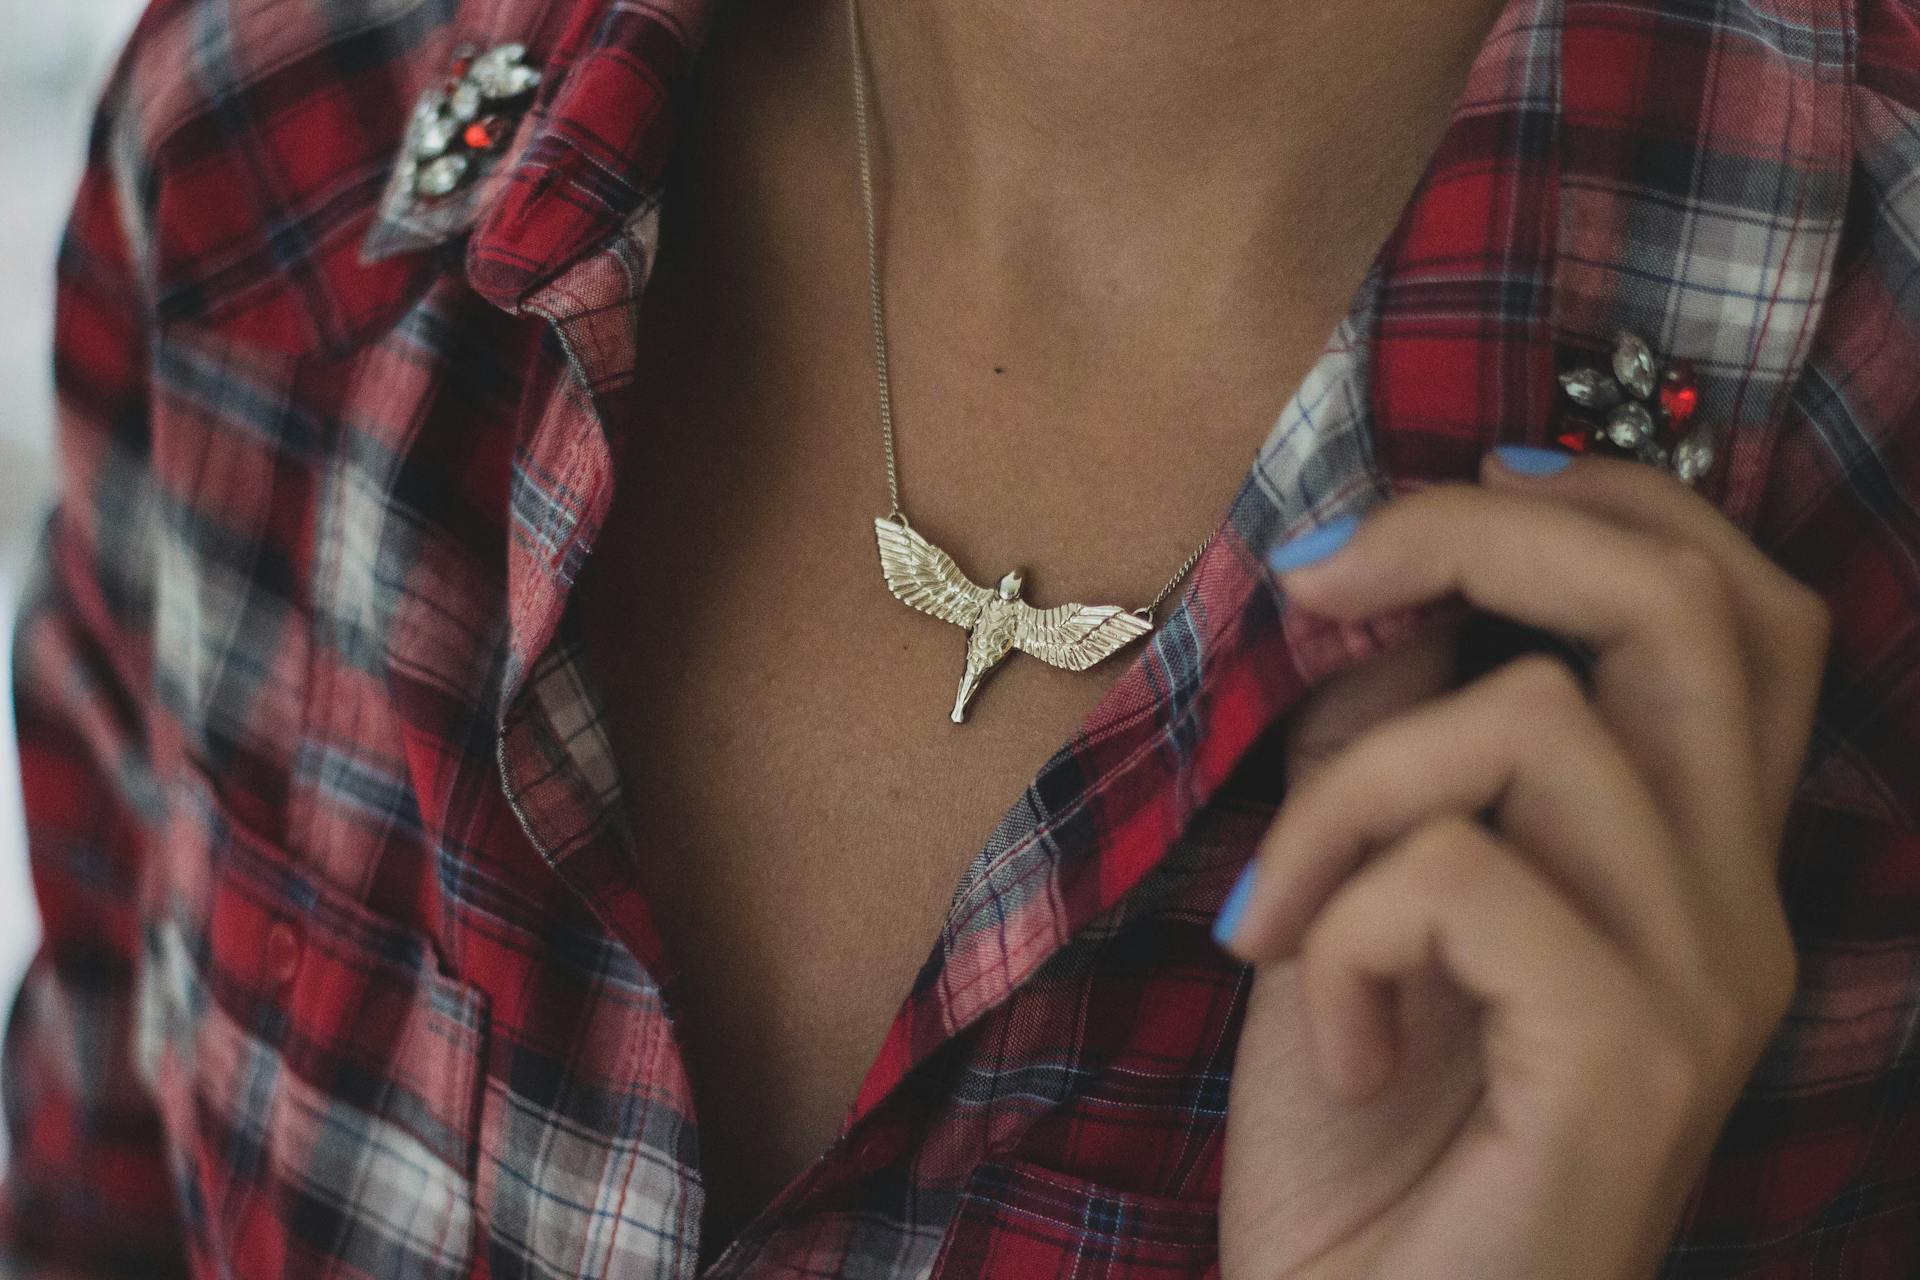 A necklace with a bird pendant | Source: Pexels